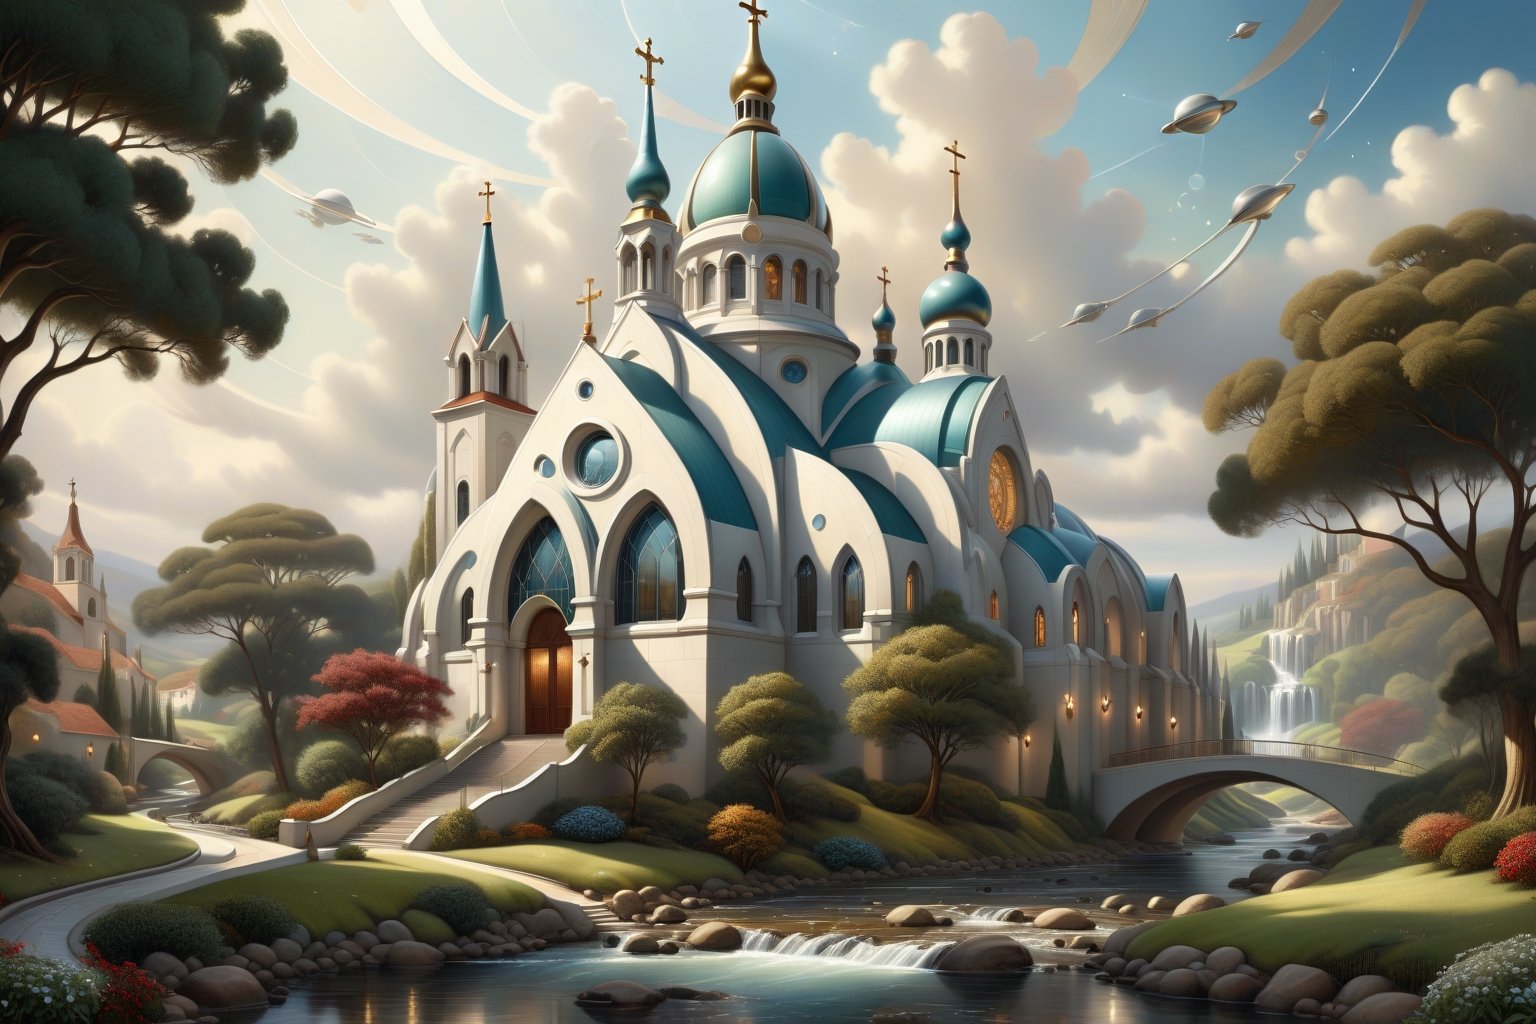 by Michael Parkes and Diego Rivera, (retro futurism , digital art but extremely beautiful:1.4)Masterpiece, best quality, hi res, 8k, close up photo of realistic and futuristic image of a church in a country setting with a stream running through it,, inspired by Thomas Kinkade